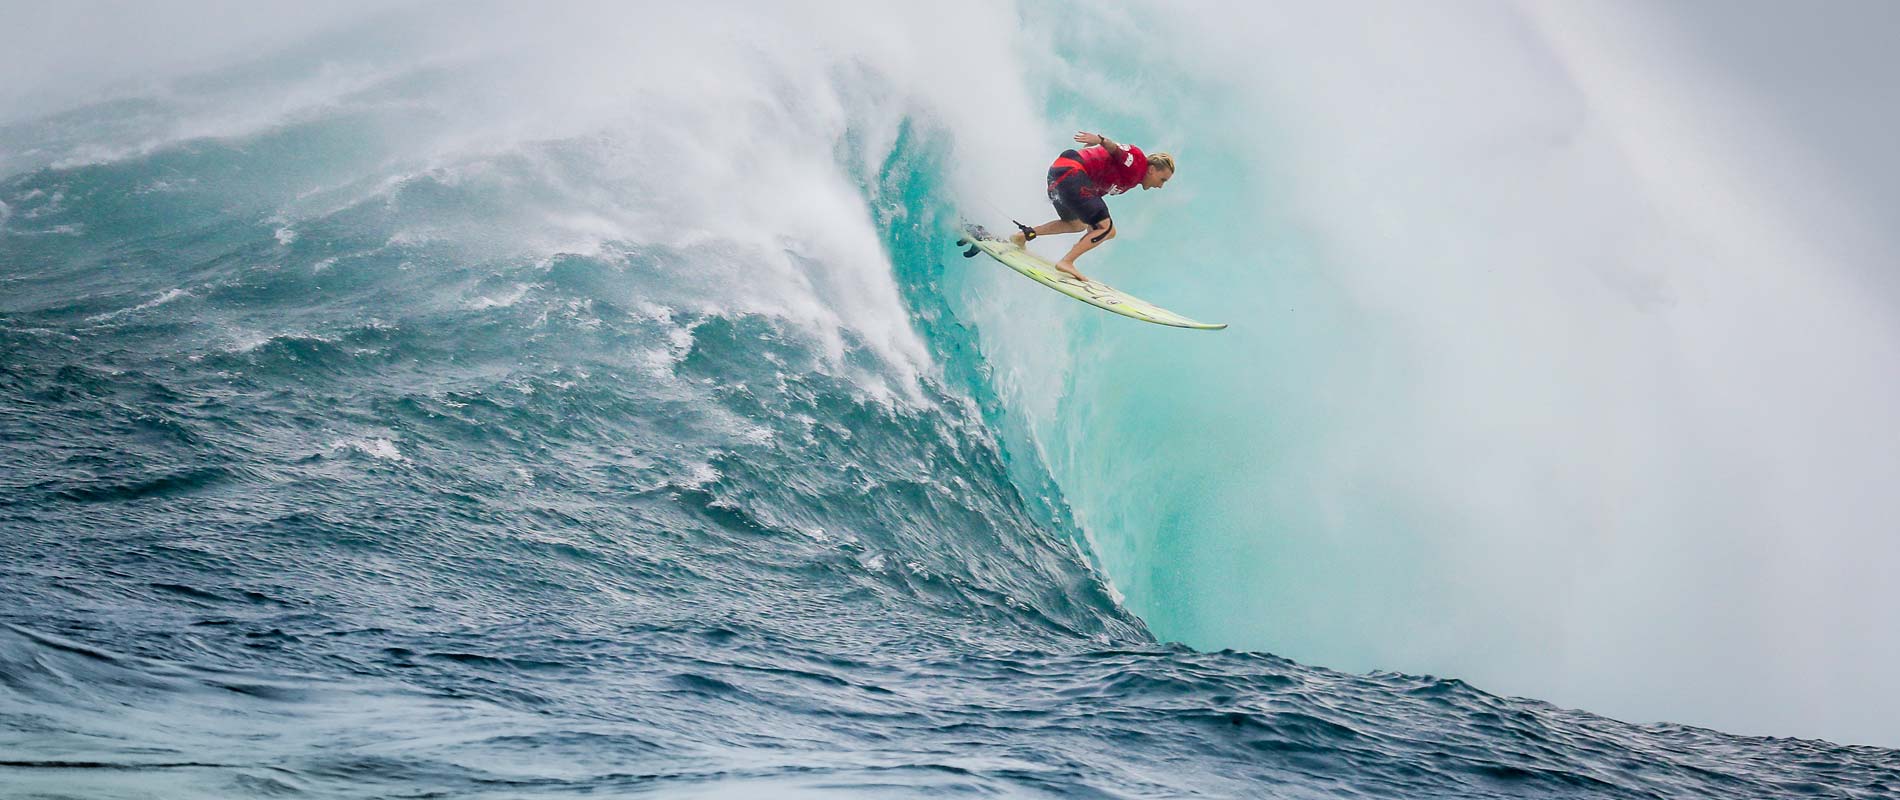 Keala Kennelly, Isurus Team Rider and Big Wave Surfer at Jaws